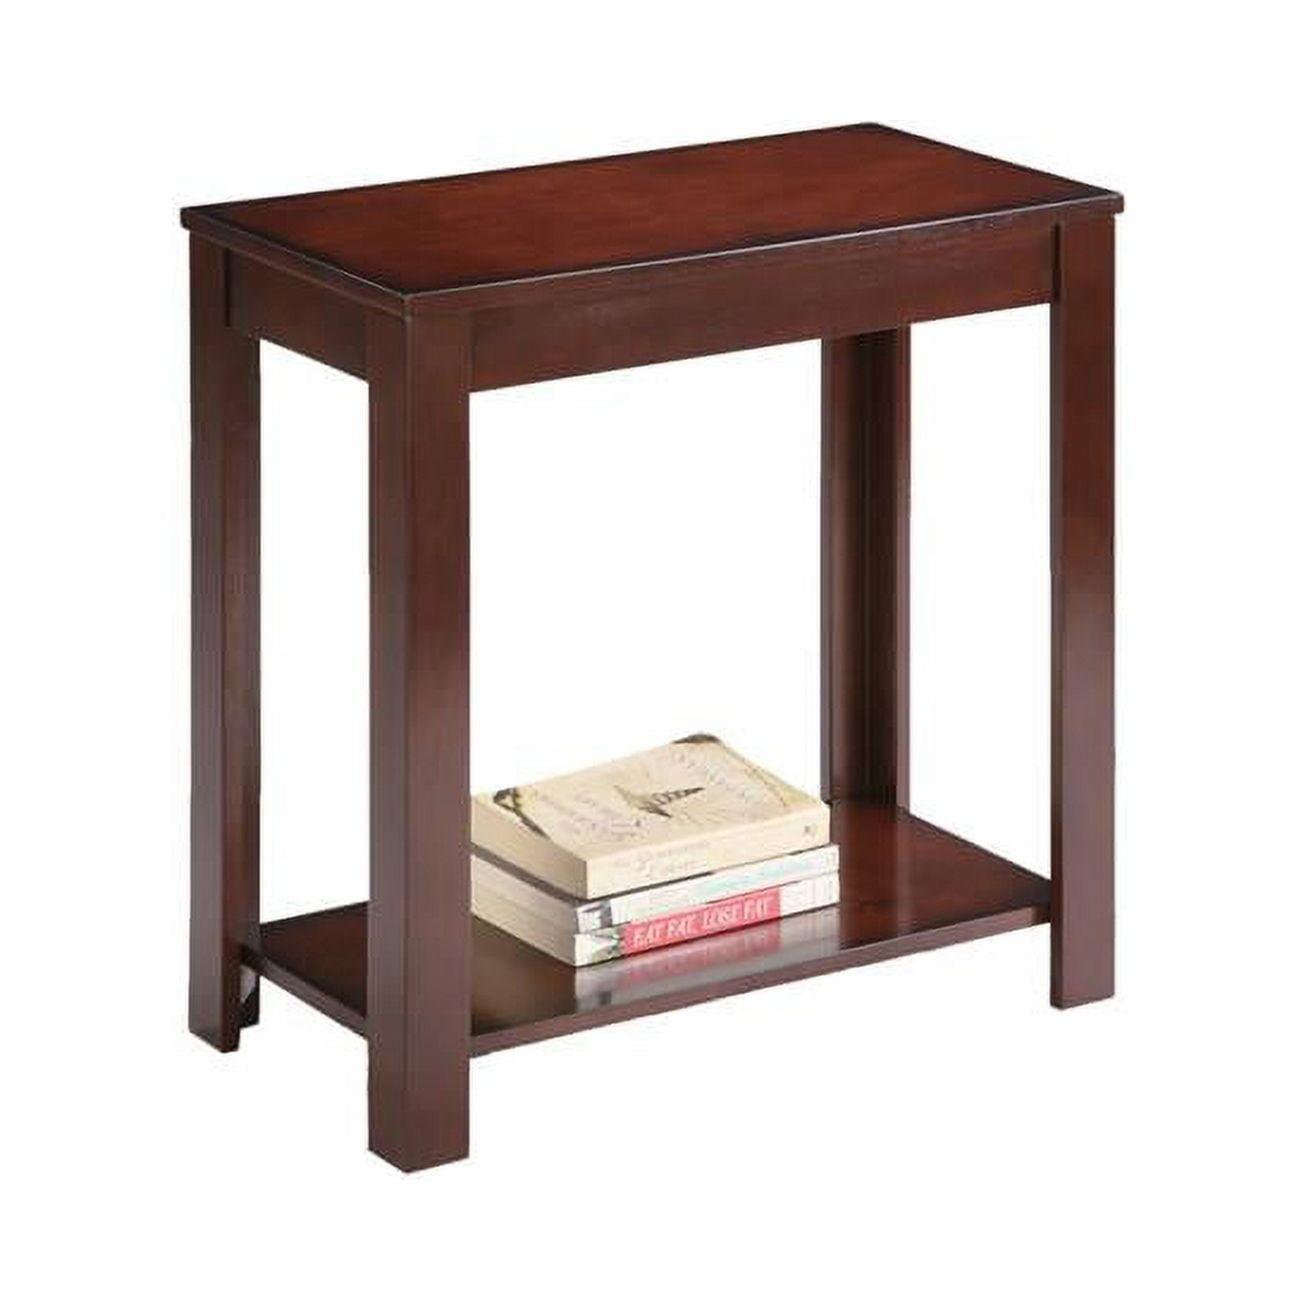 Sleek Transitional Espresso Chairside Table with Fixed Shelf